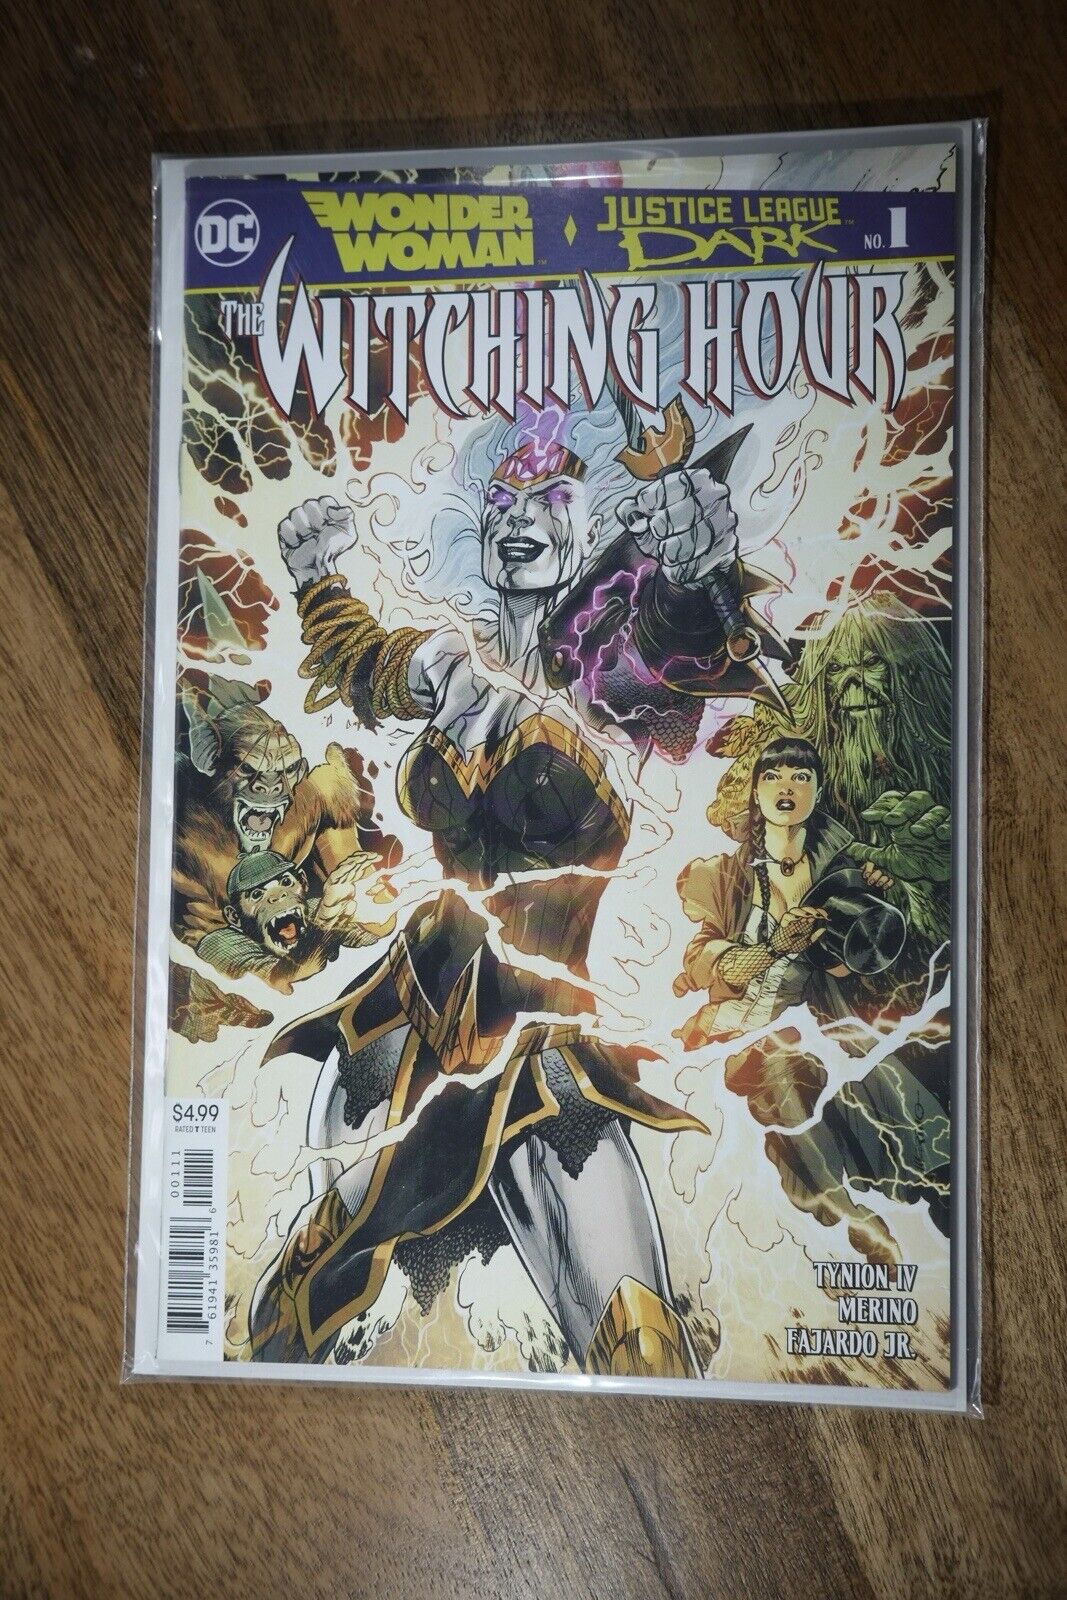 Wonder Woman Justice League Dark the Witching Hour #1: DC Comics 2018